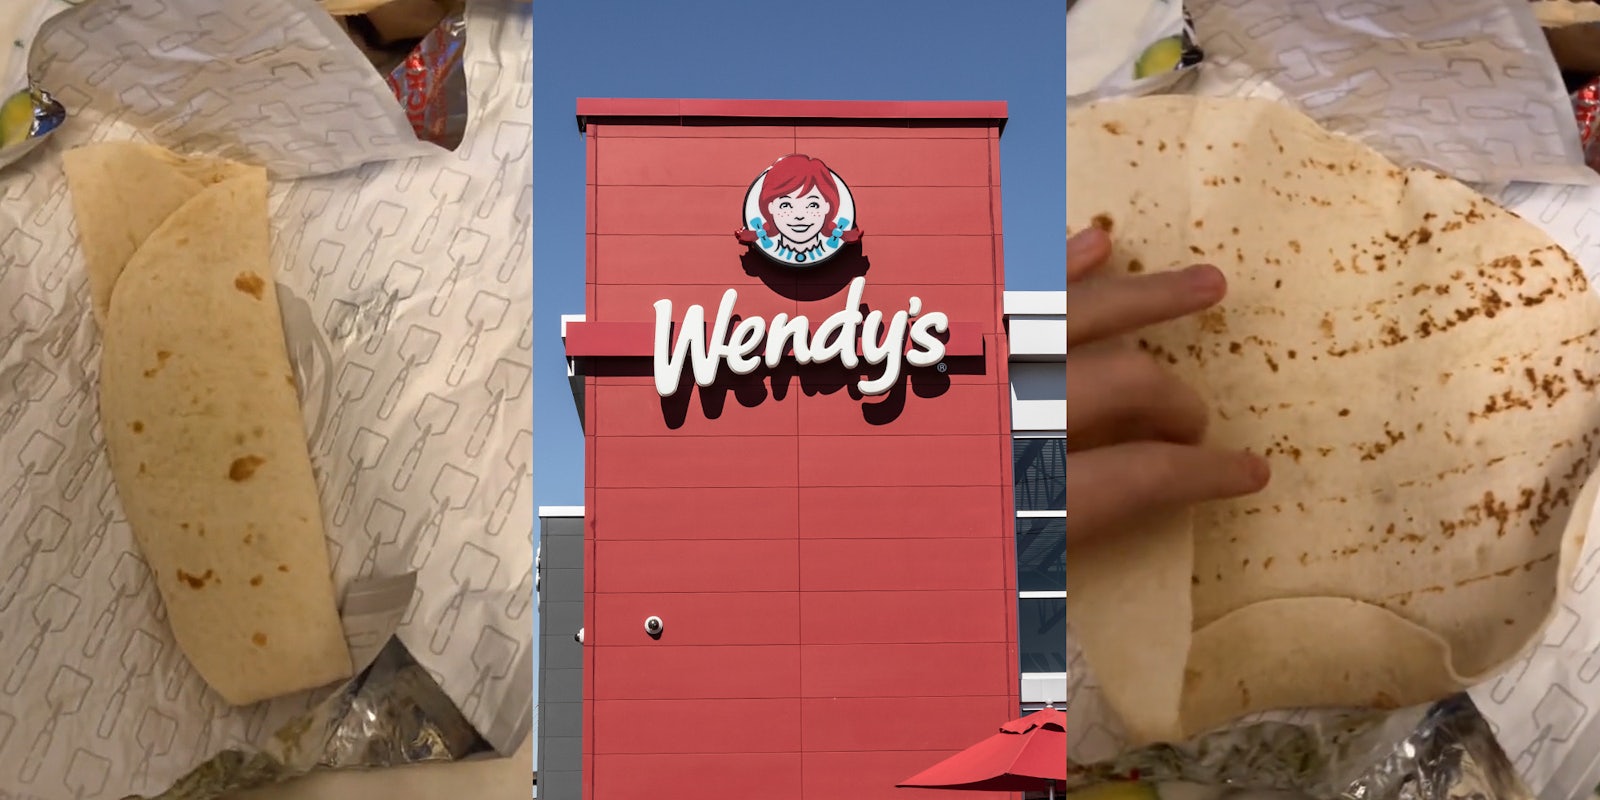 tortilla on wrapper (l) Wendy's building with sign and blue sky (c) hand unwrapping tortilla to reveal nothing inside (r)